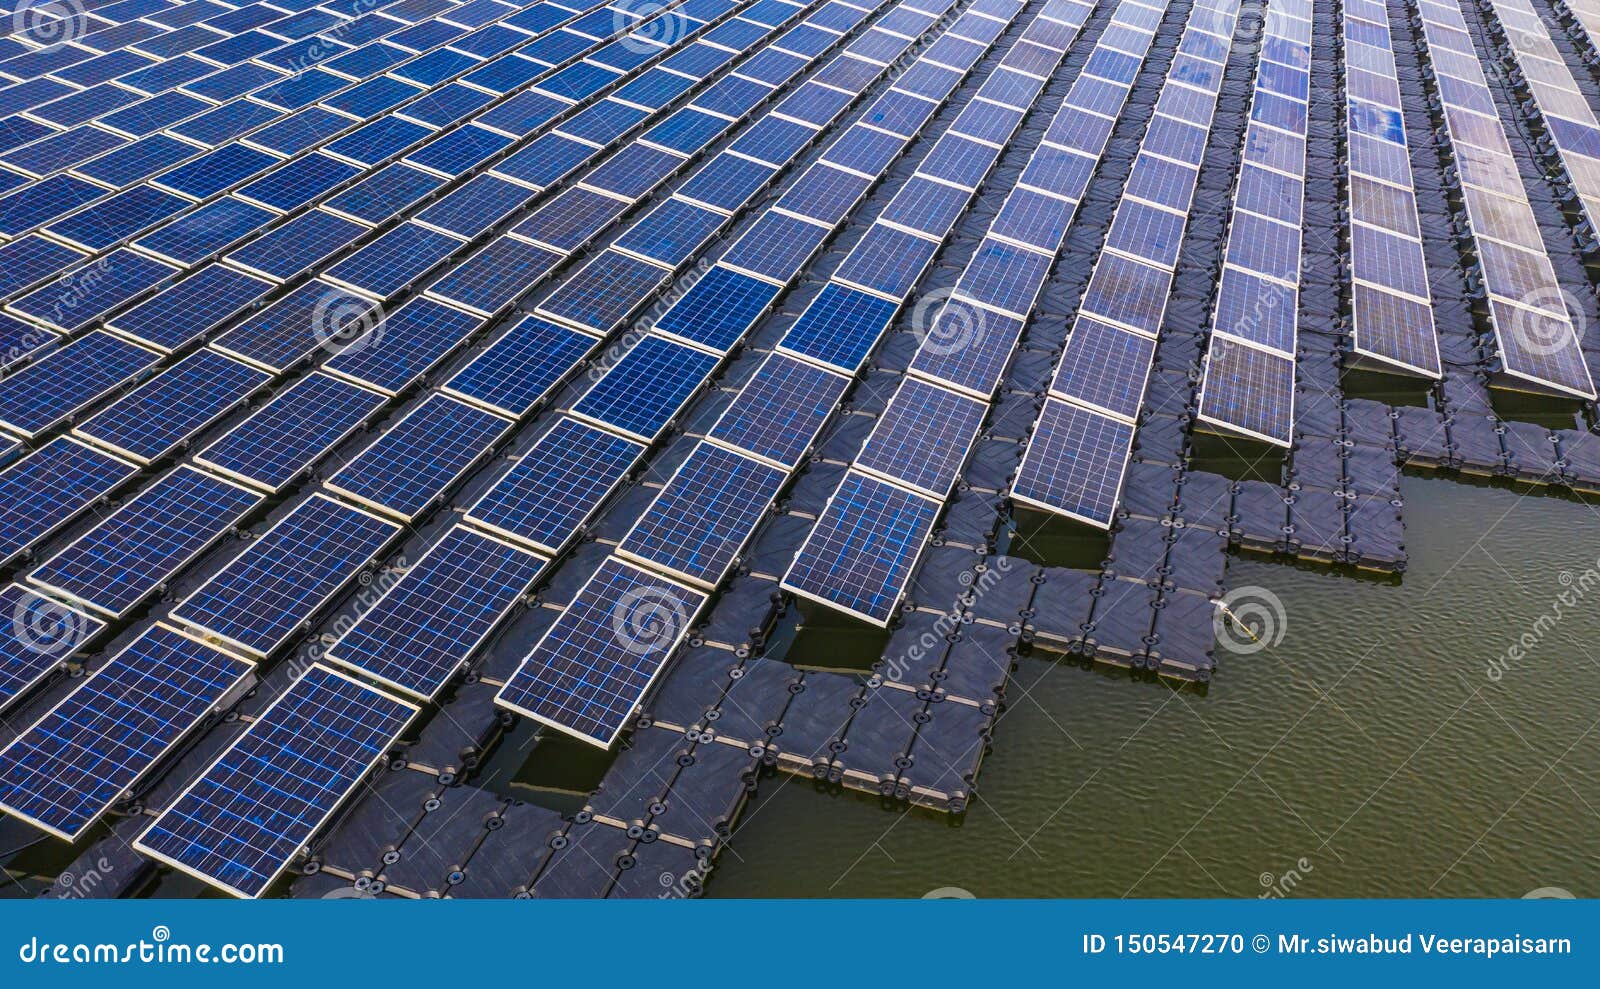 solar panels in aerial view, rows array of polycrystalline silicon solar cells or photovoltaics in solar power plant floating on